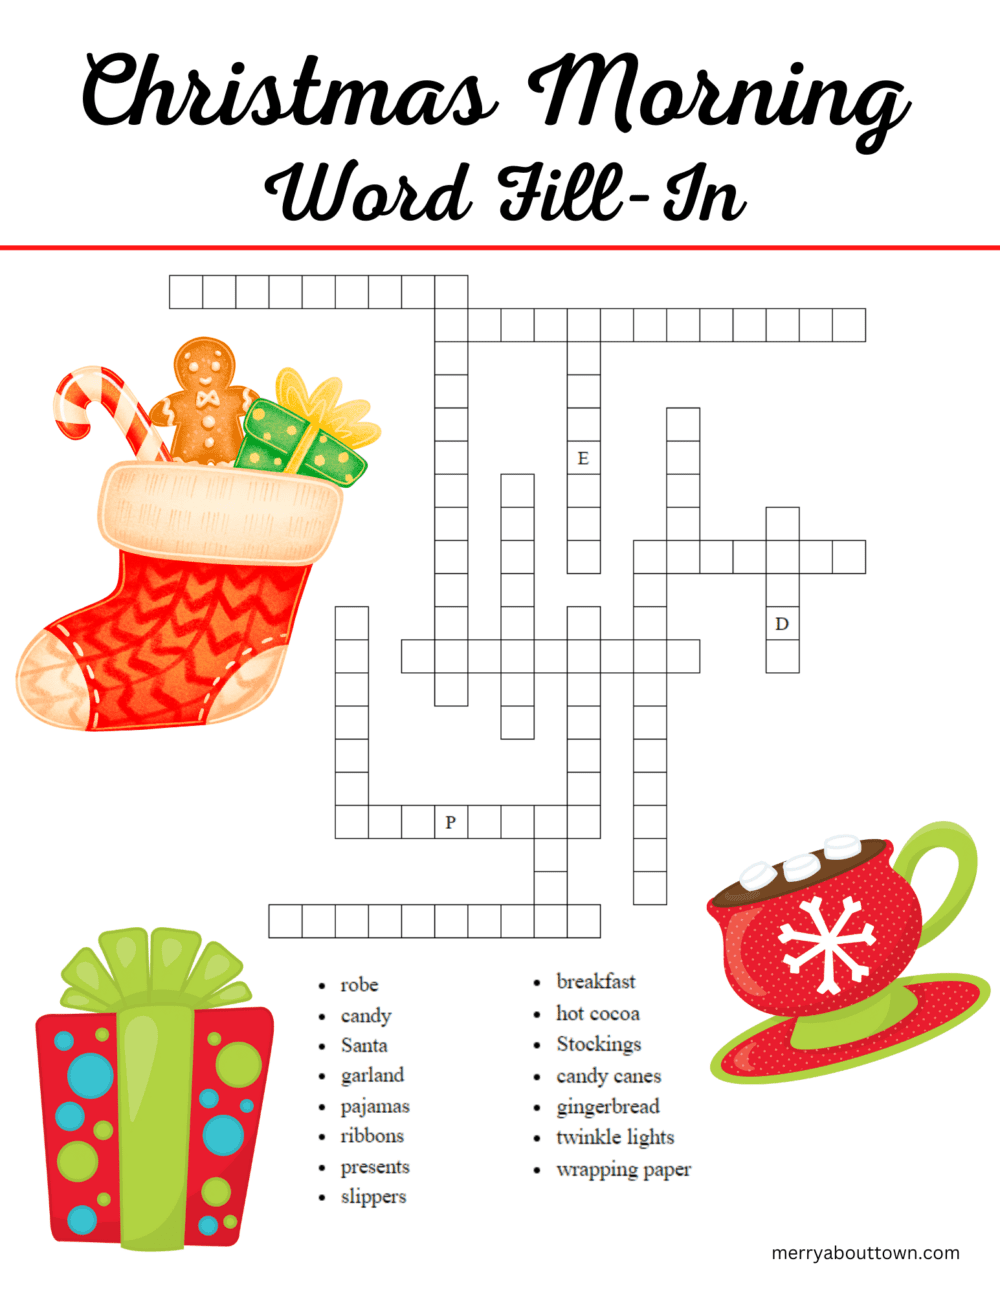 Christmas morning themed word fill-in